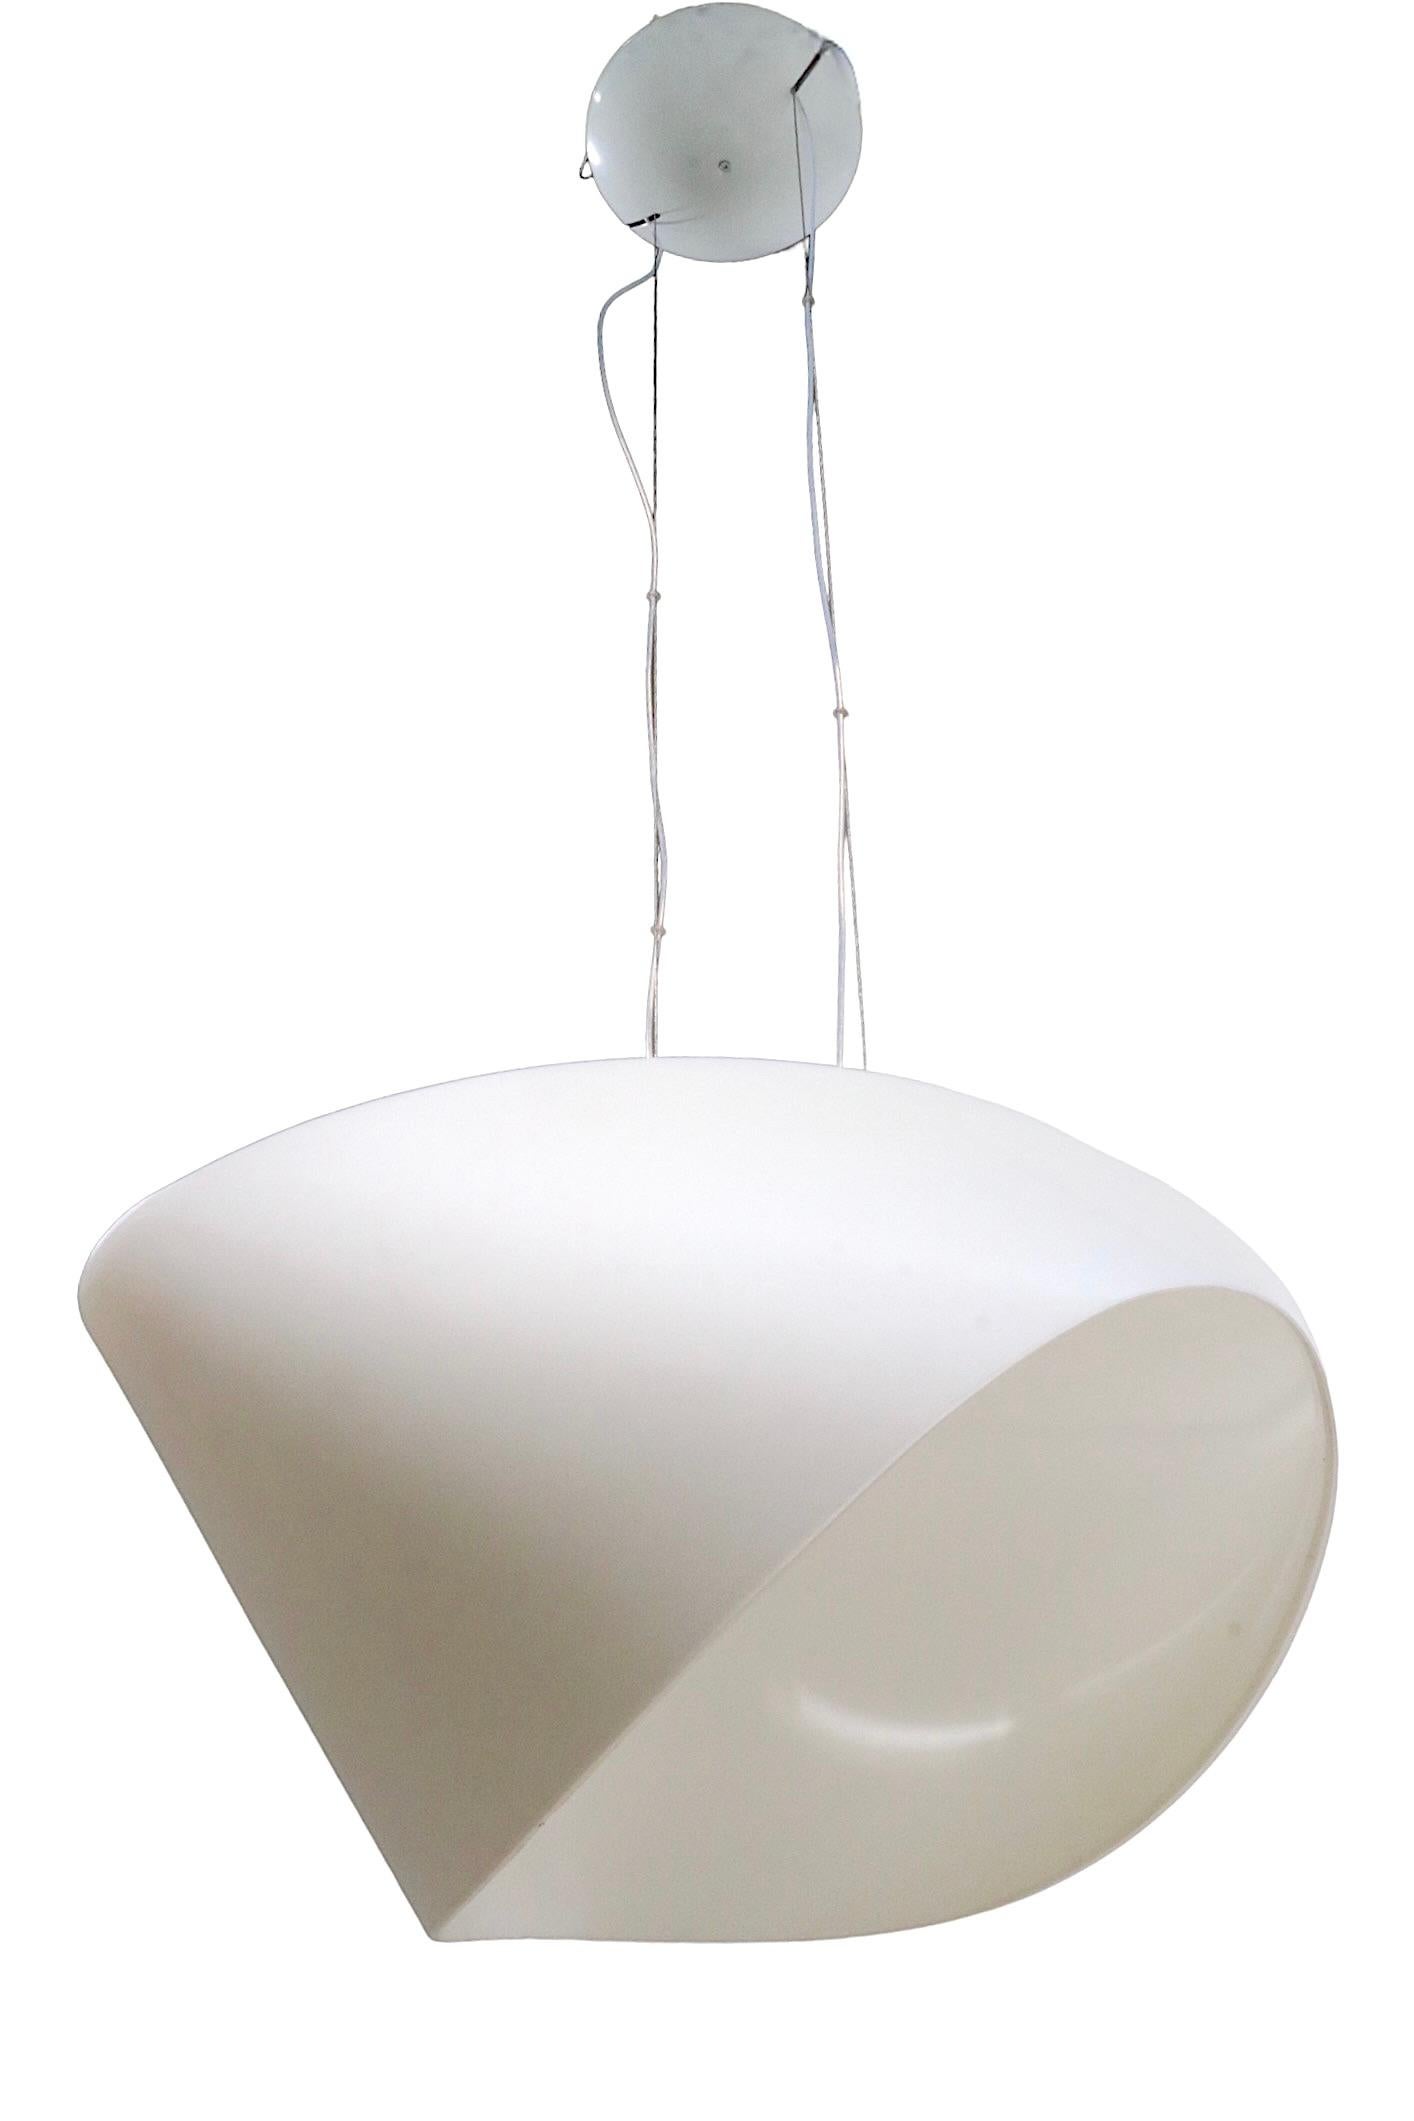 Asymmetrical Satin Glass Post Modern Light Fixture Made in Italy by Foscarini For Sale 6